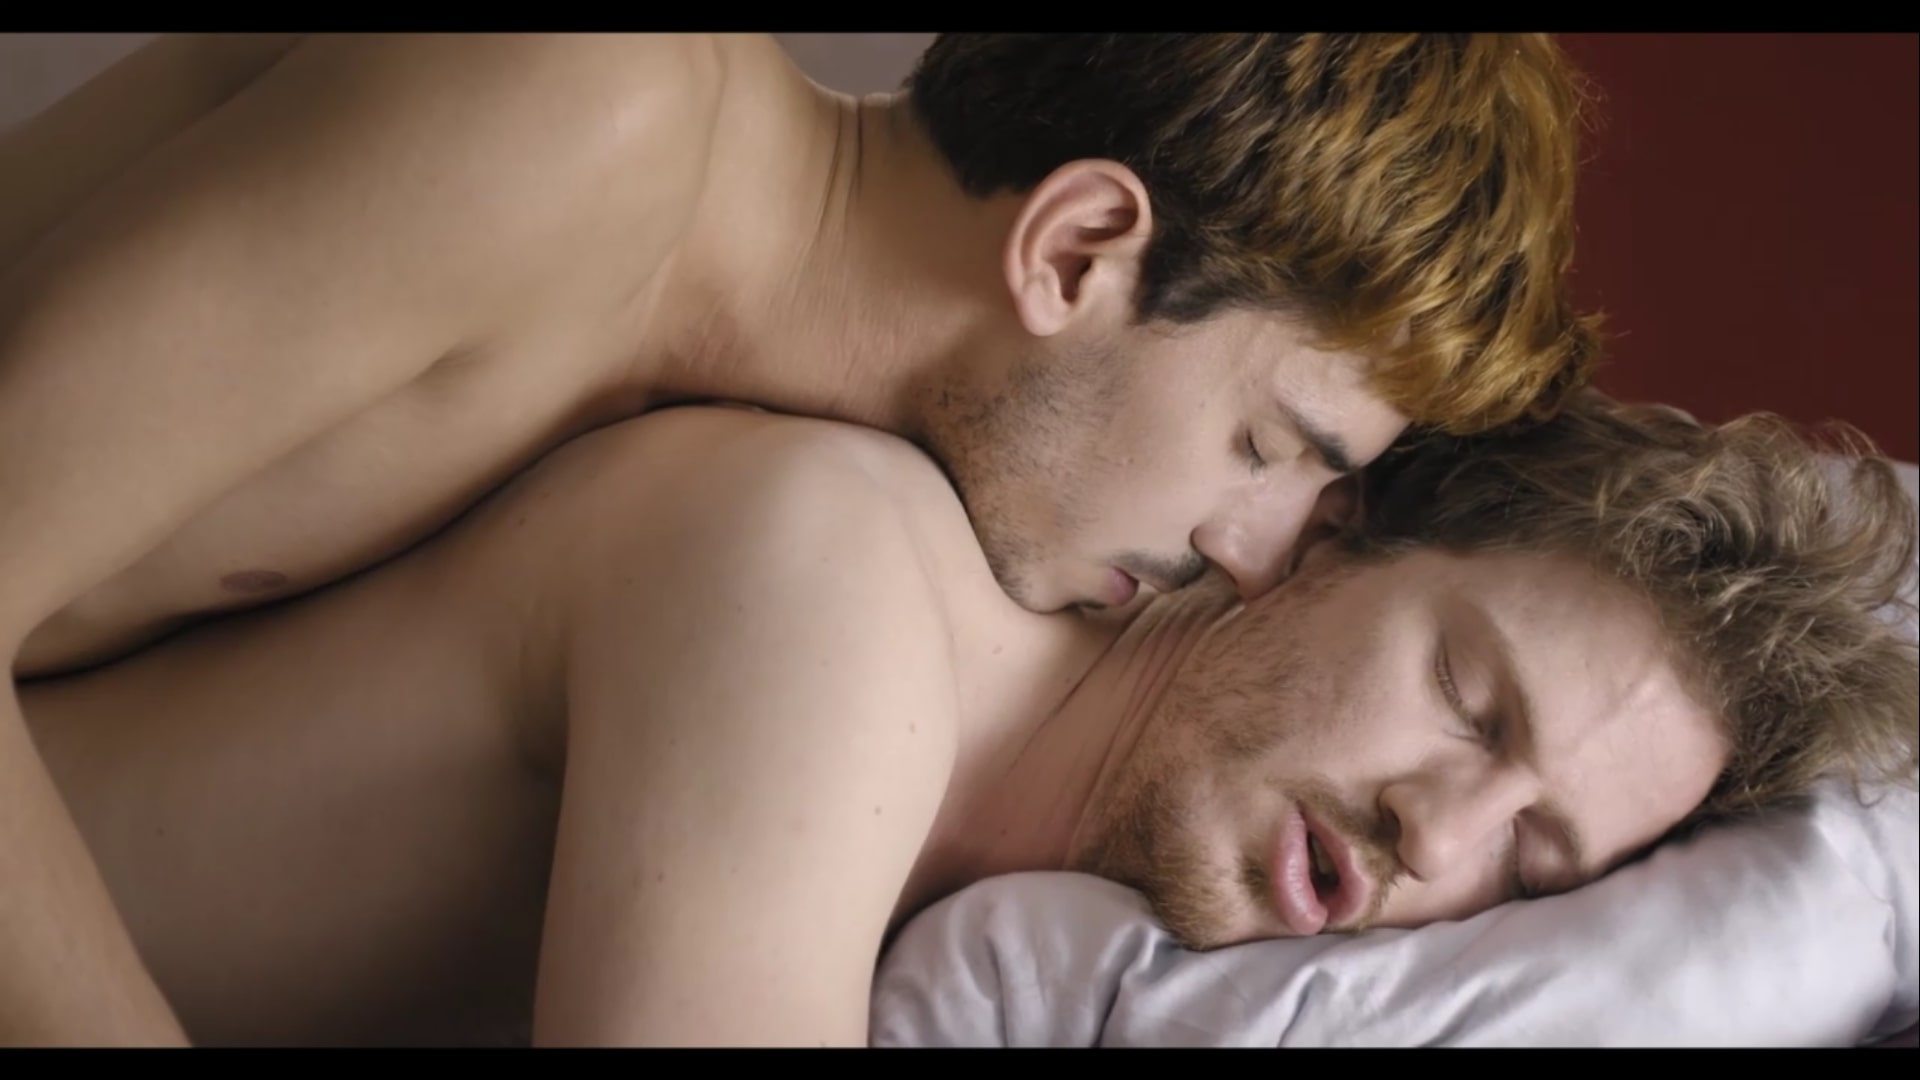 Shot from Rubber Dolphin, gay-themed short film from Israel